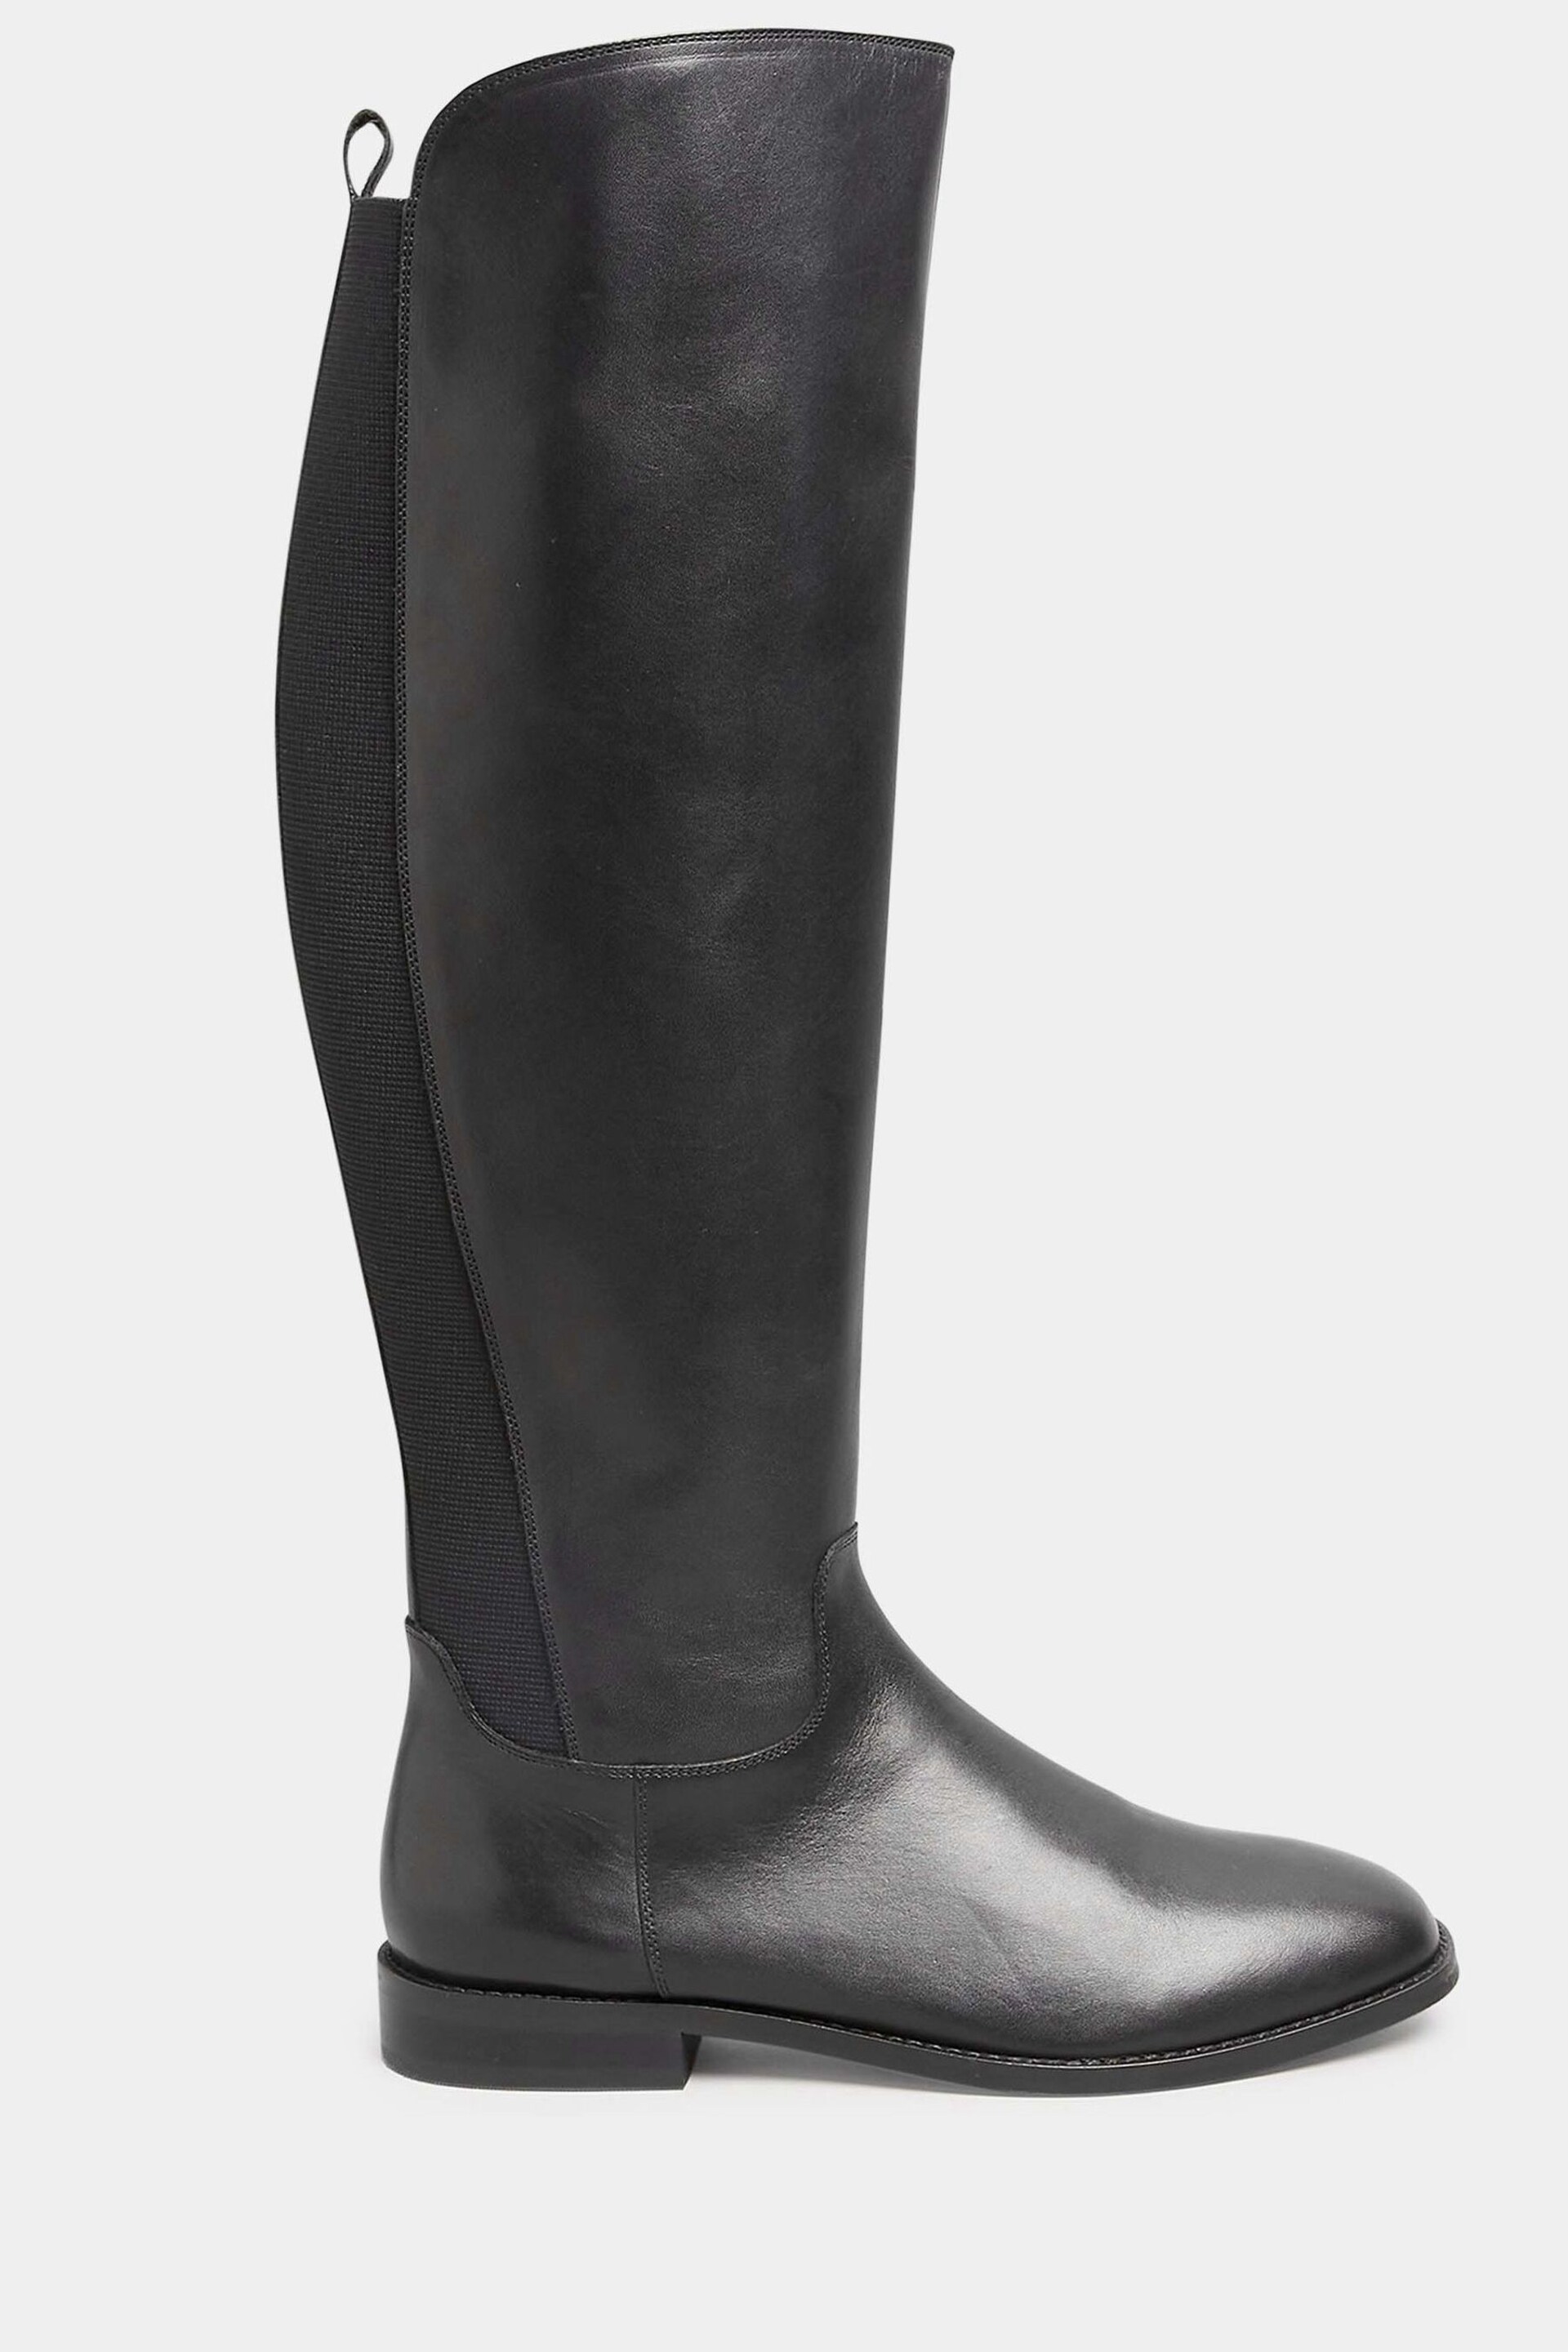 Long Tall Sally Black Leather Knee High Boots - Image 1 of 5